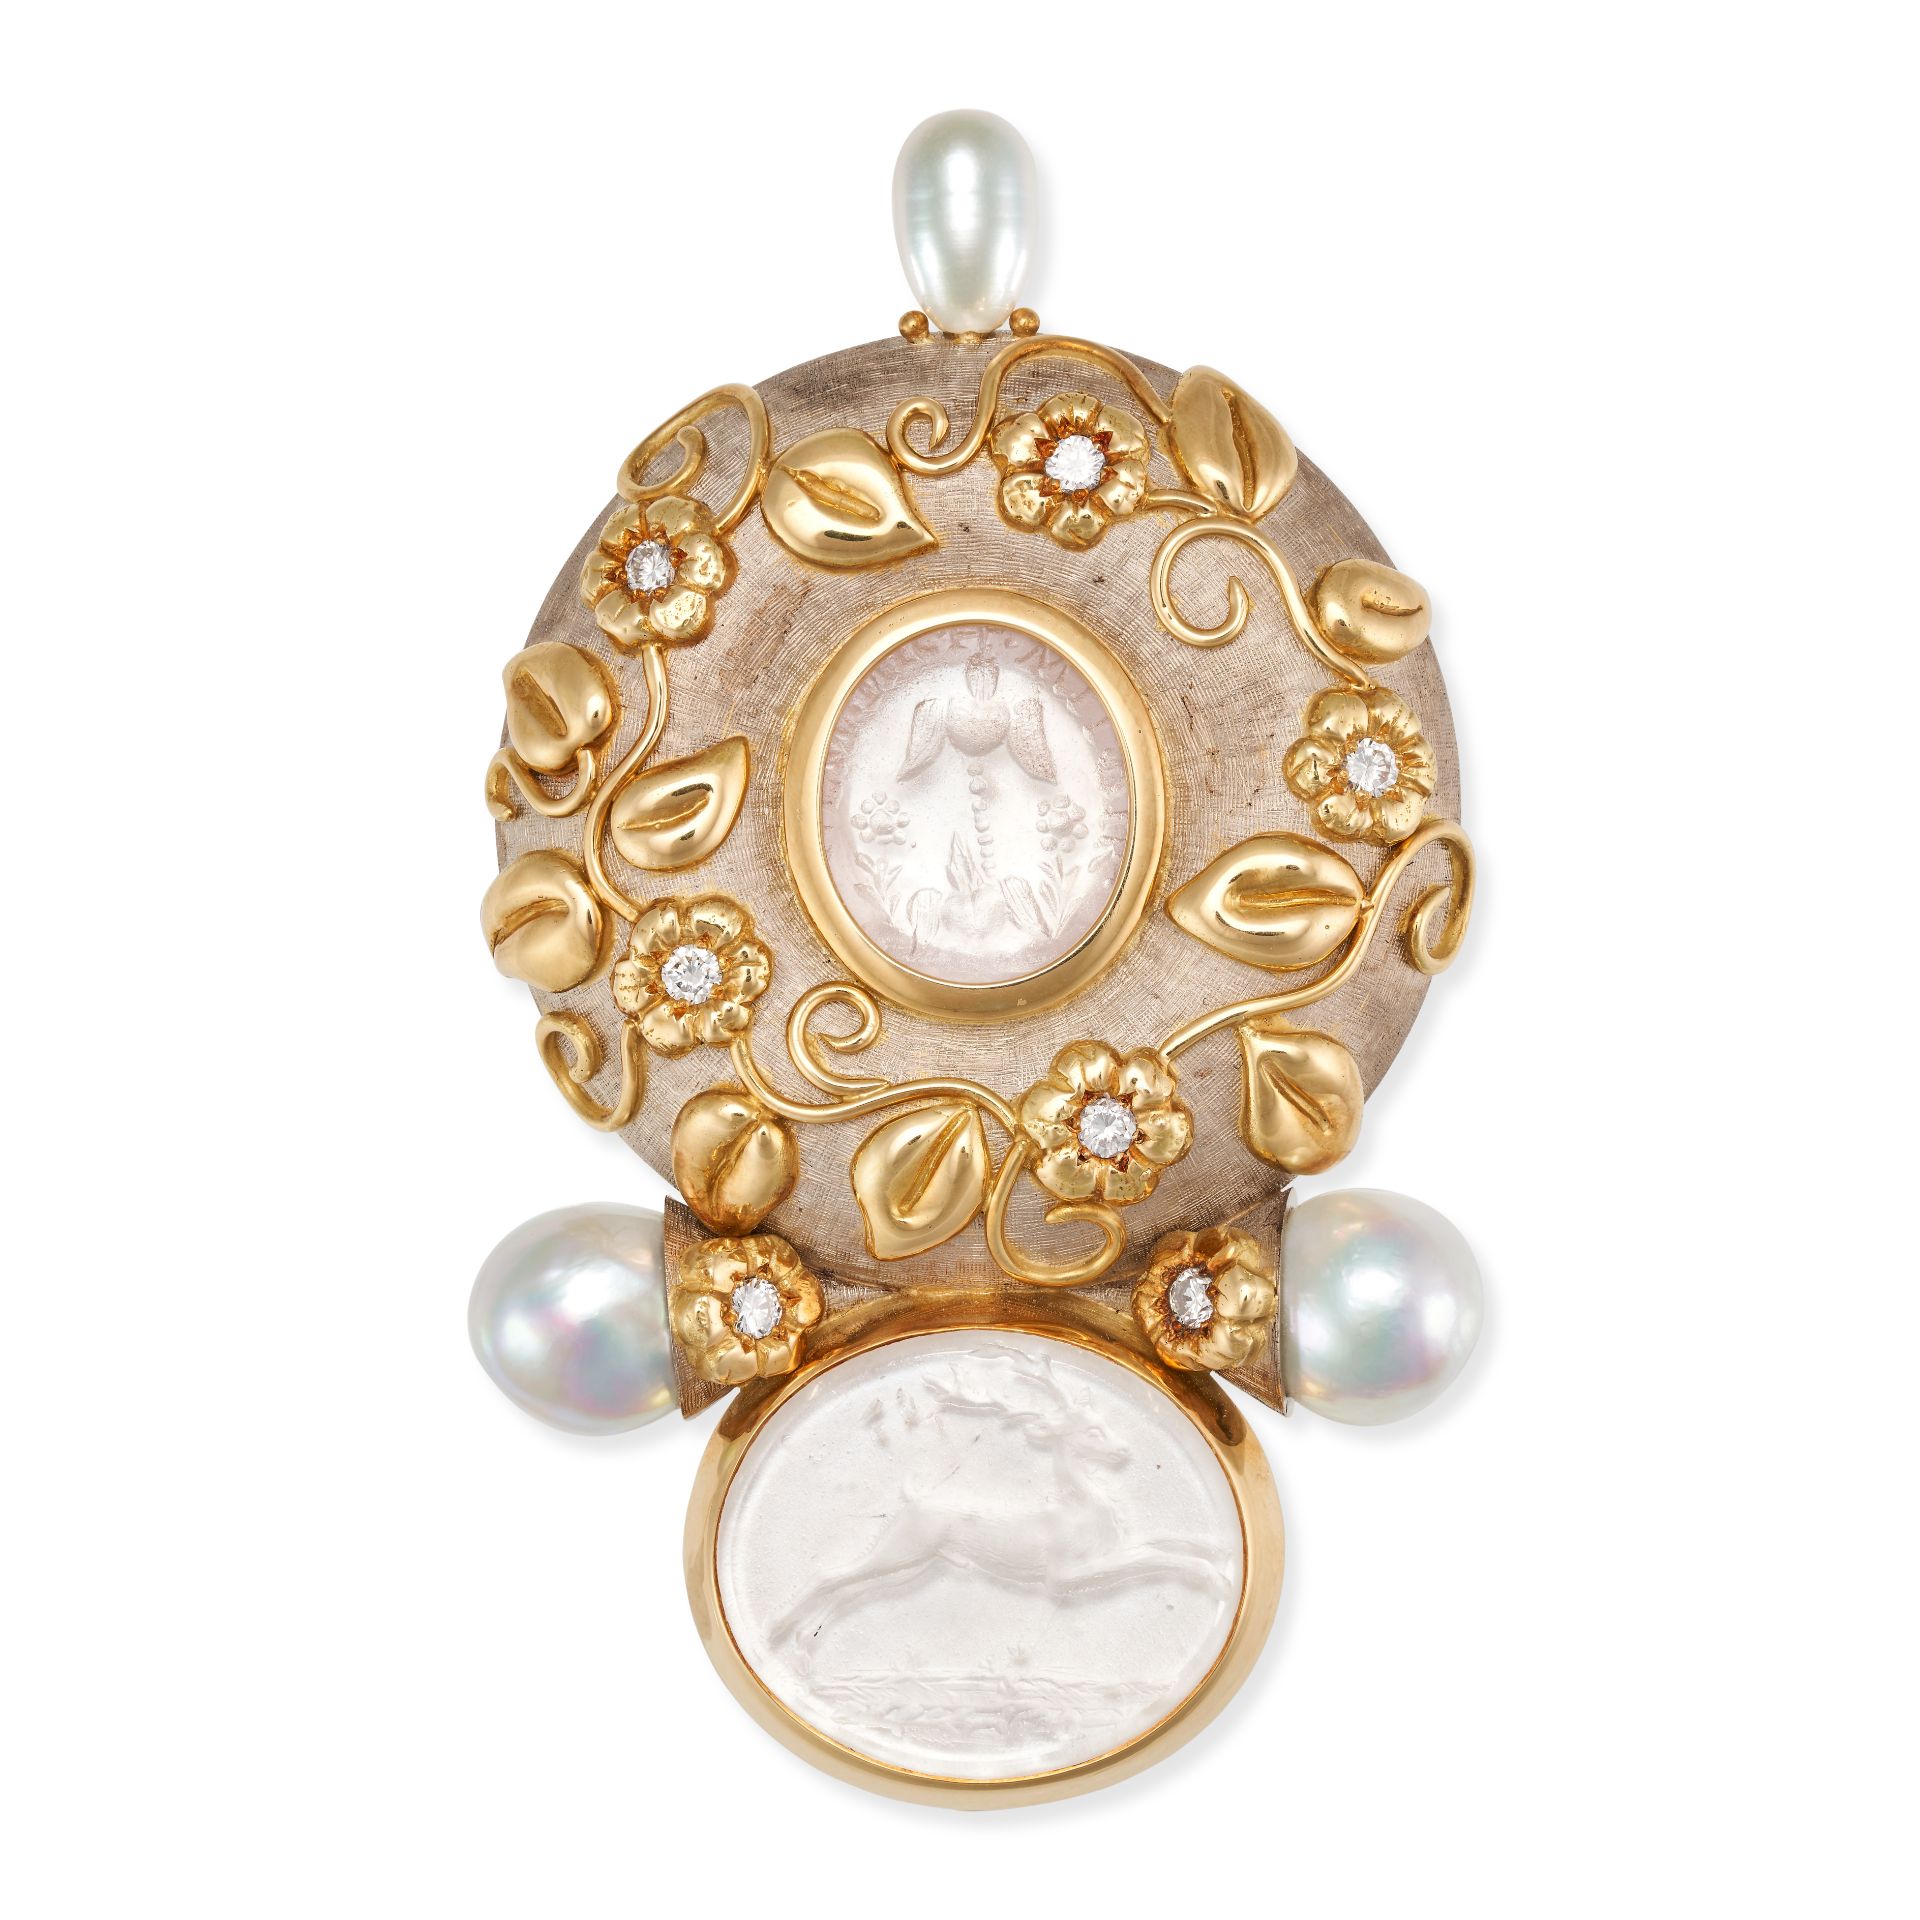 ELIZABETH GAGE, A ROCK CRYSTAL INTAGLIO, PEARL AND DIAMOND BROOCH in 18ct yellow and white gold, ...